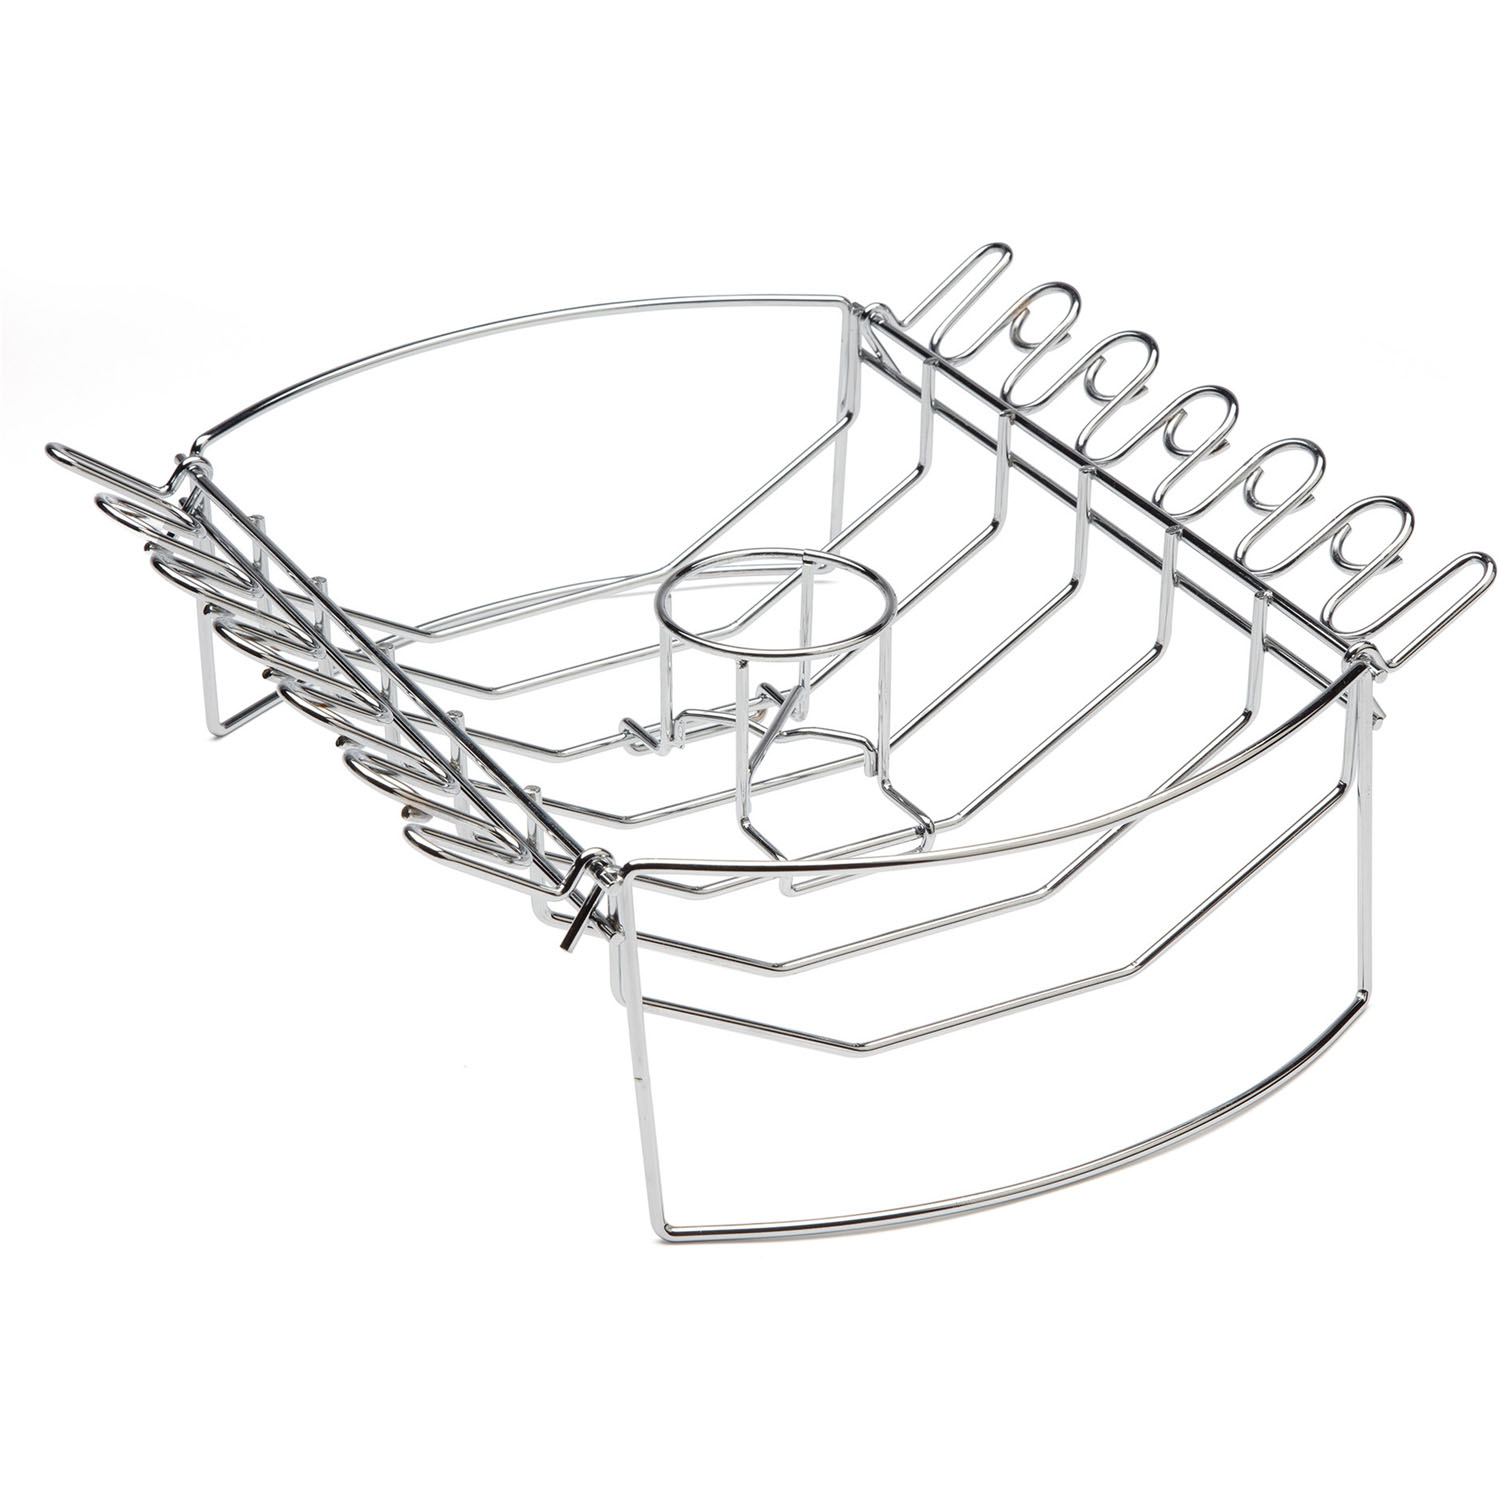 Cuisinart 4-in-1 BBQ Basket with Chicken Wing Rack - image 1 of 8